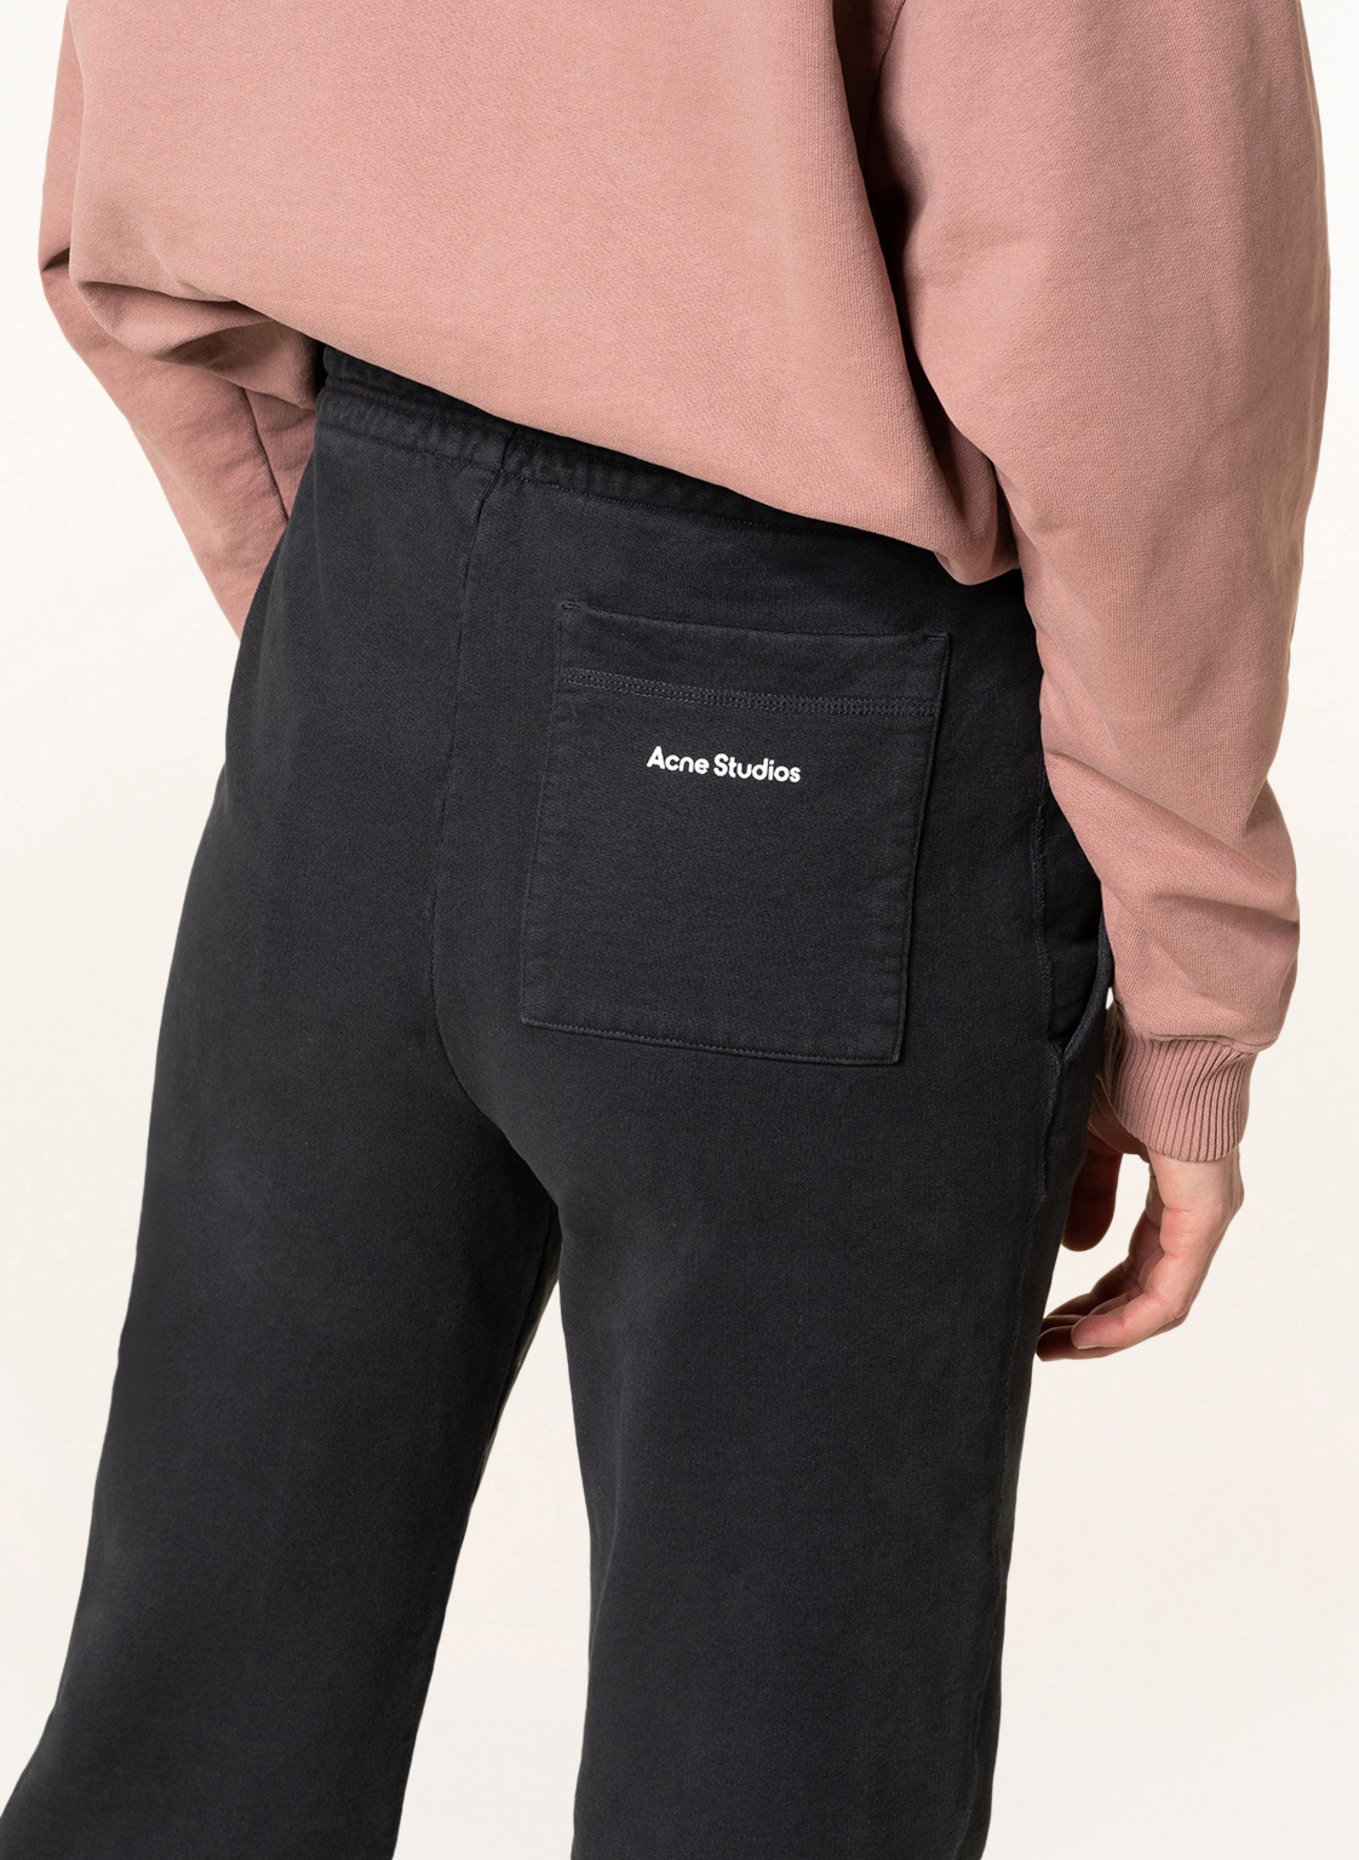 Acne Studios Pants in jogger style, Color: BLACK (Image 5)